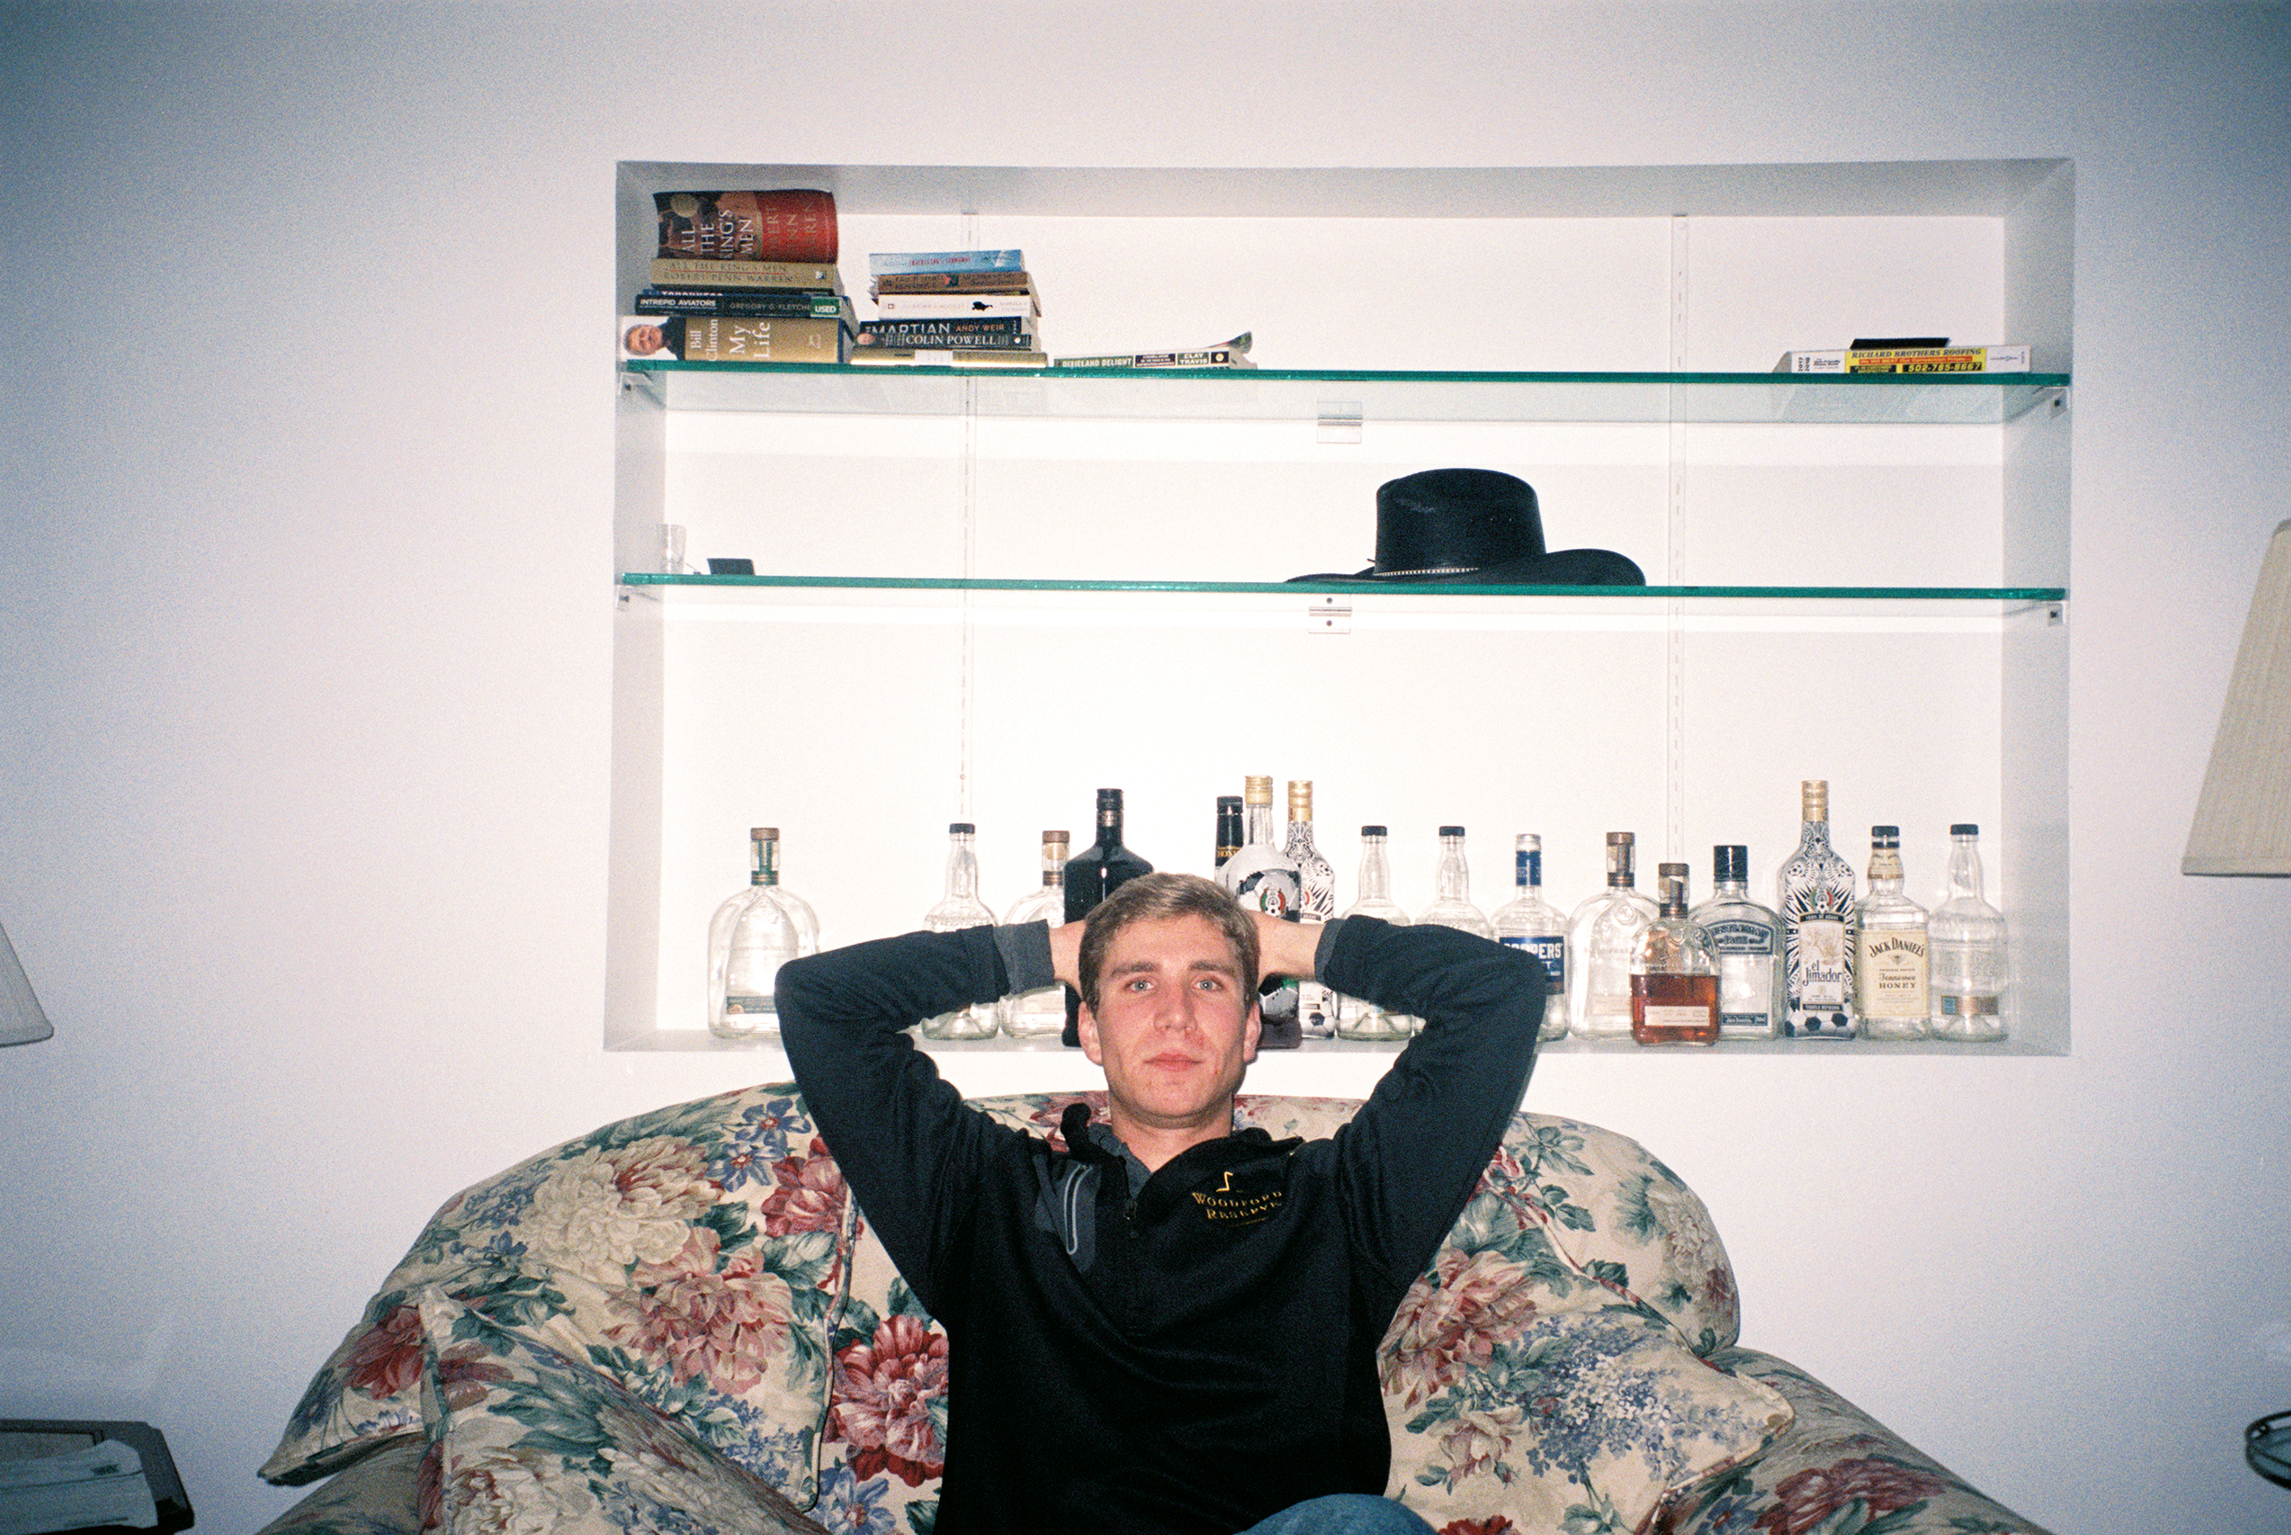  Matt relaxes at home after working as a project engineer at Woodford Reserve in Louisville, Ky. He's the only student who did not graduate from Danville High School; his family moved to Kentucky the summer after fifth grade. 